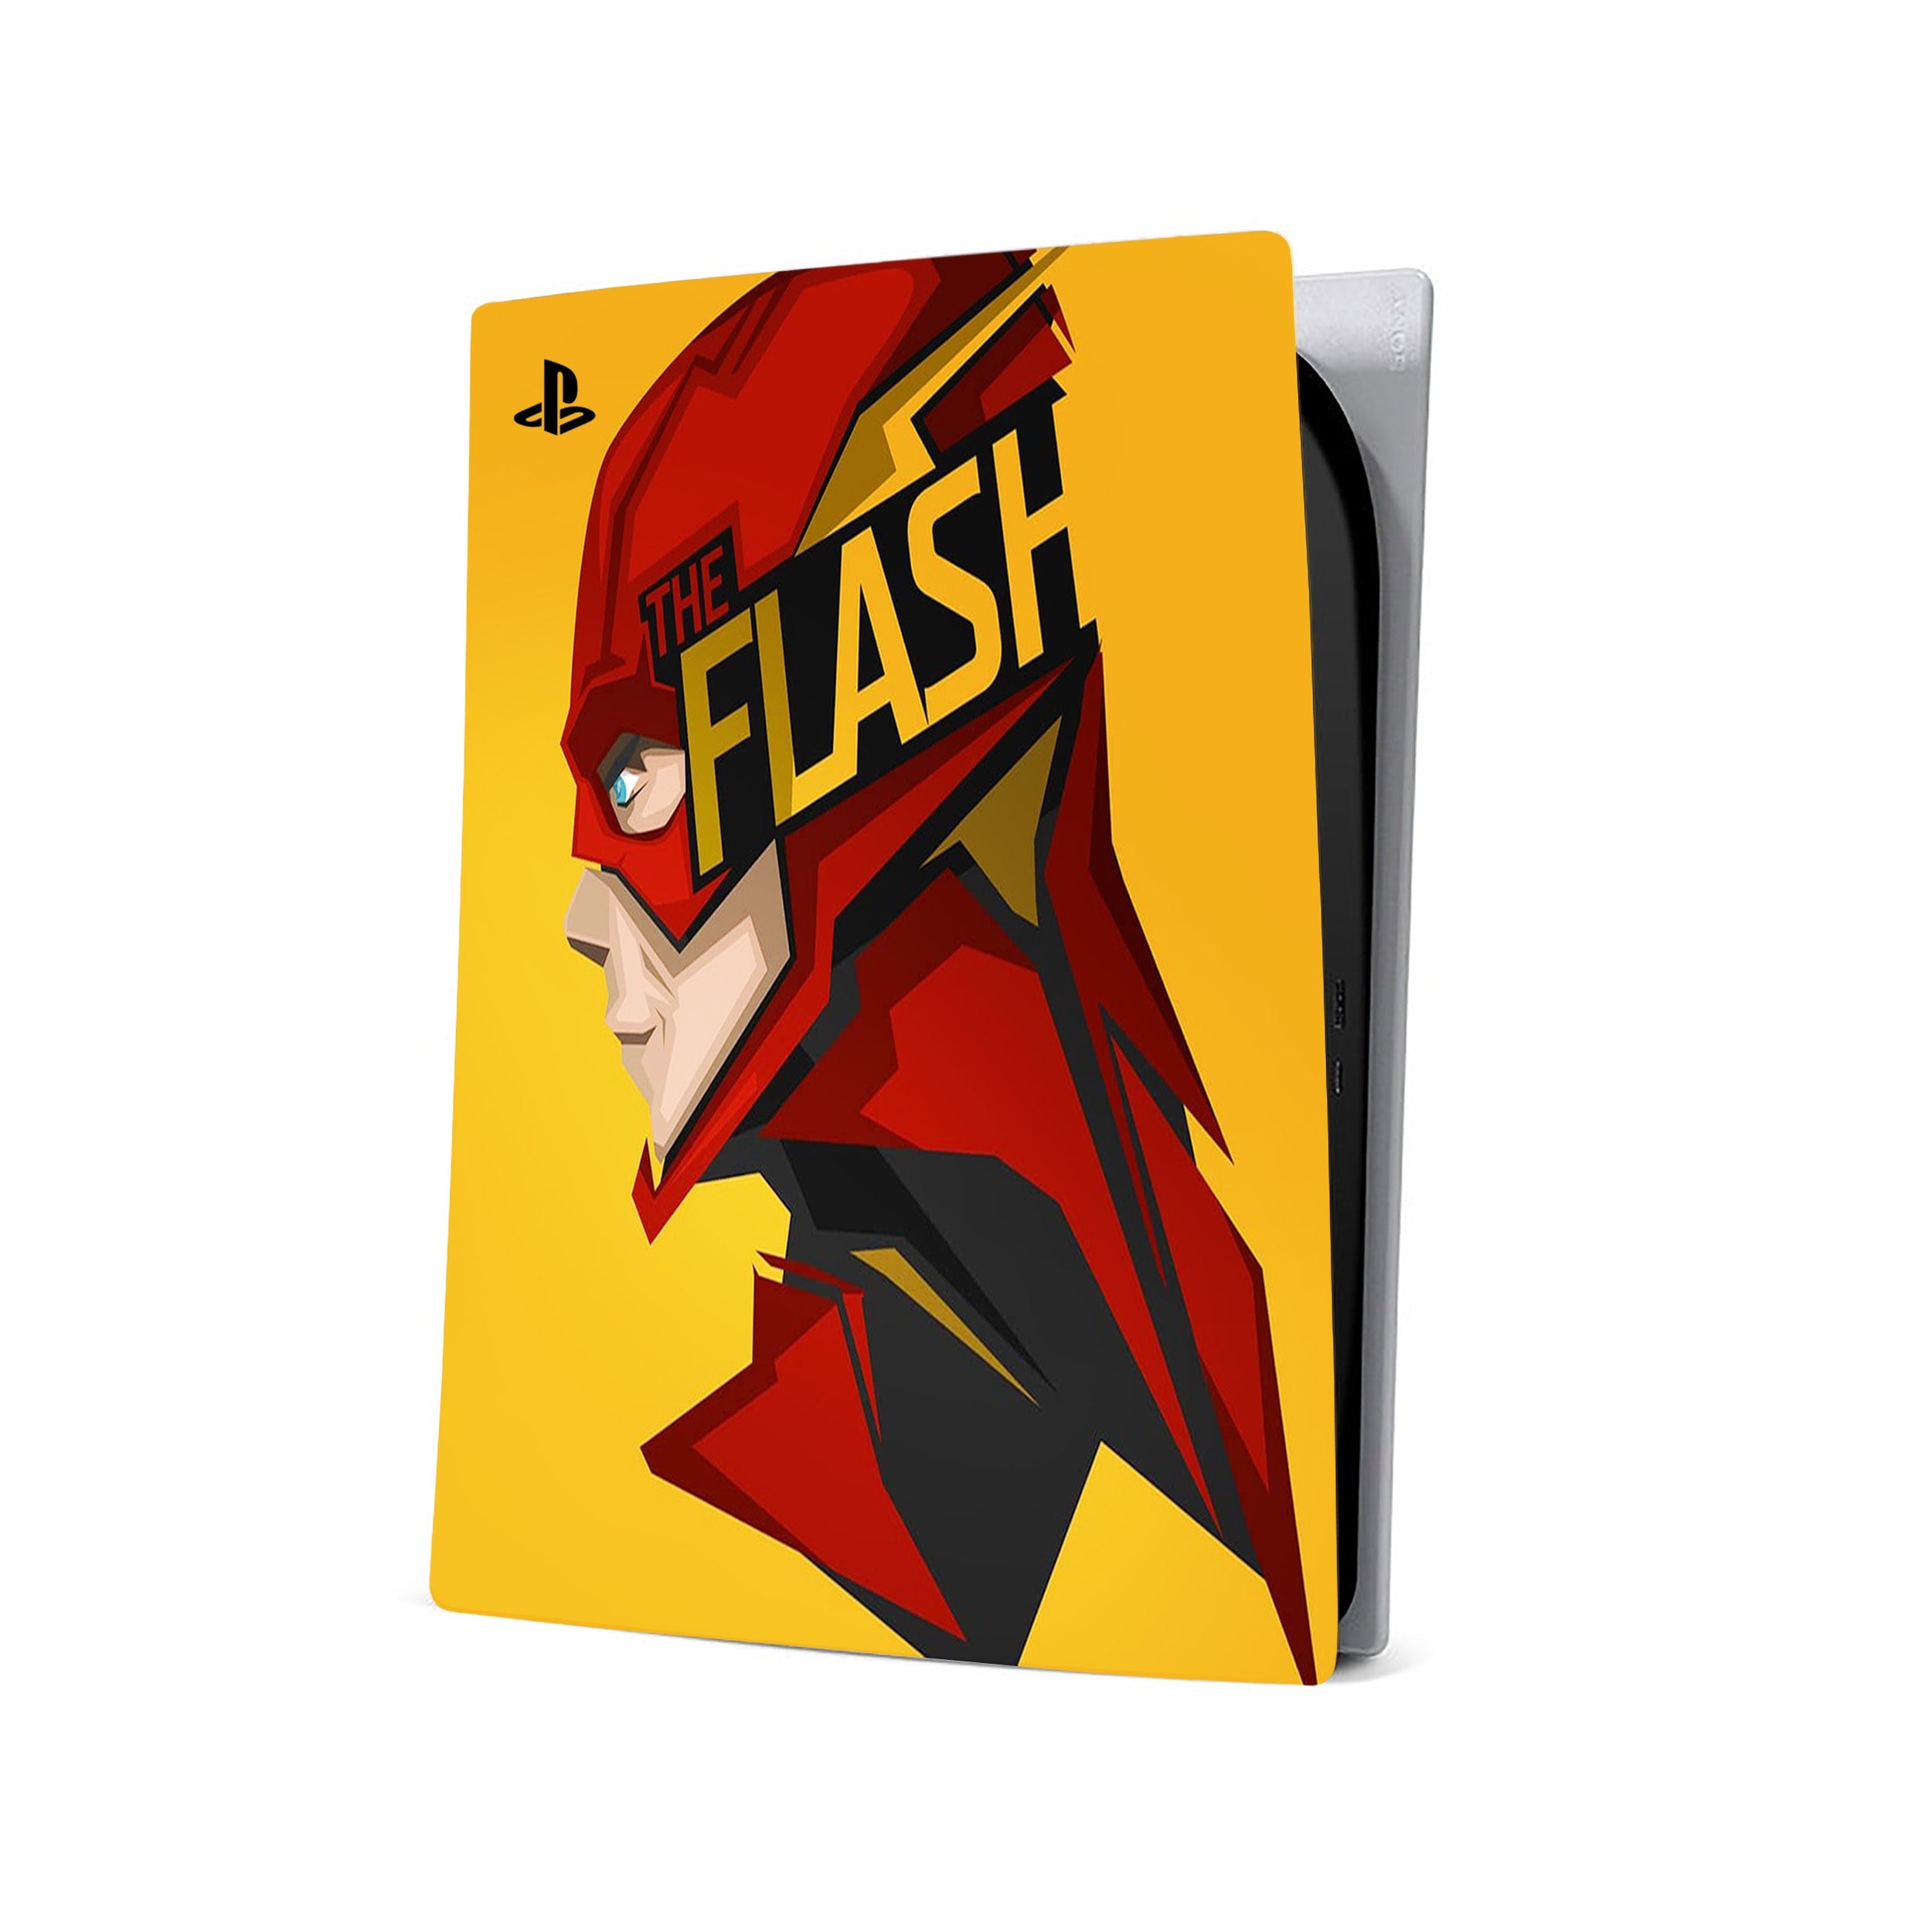 A video game skin featuring a Marvel Flash design for the PS5.